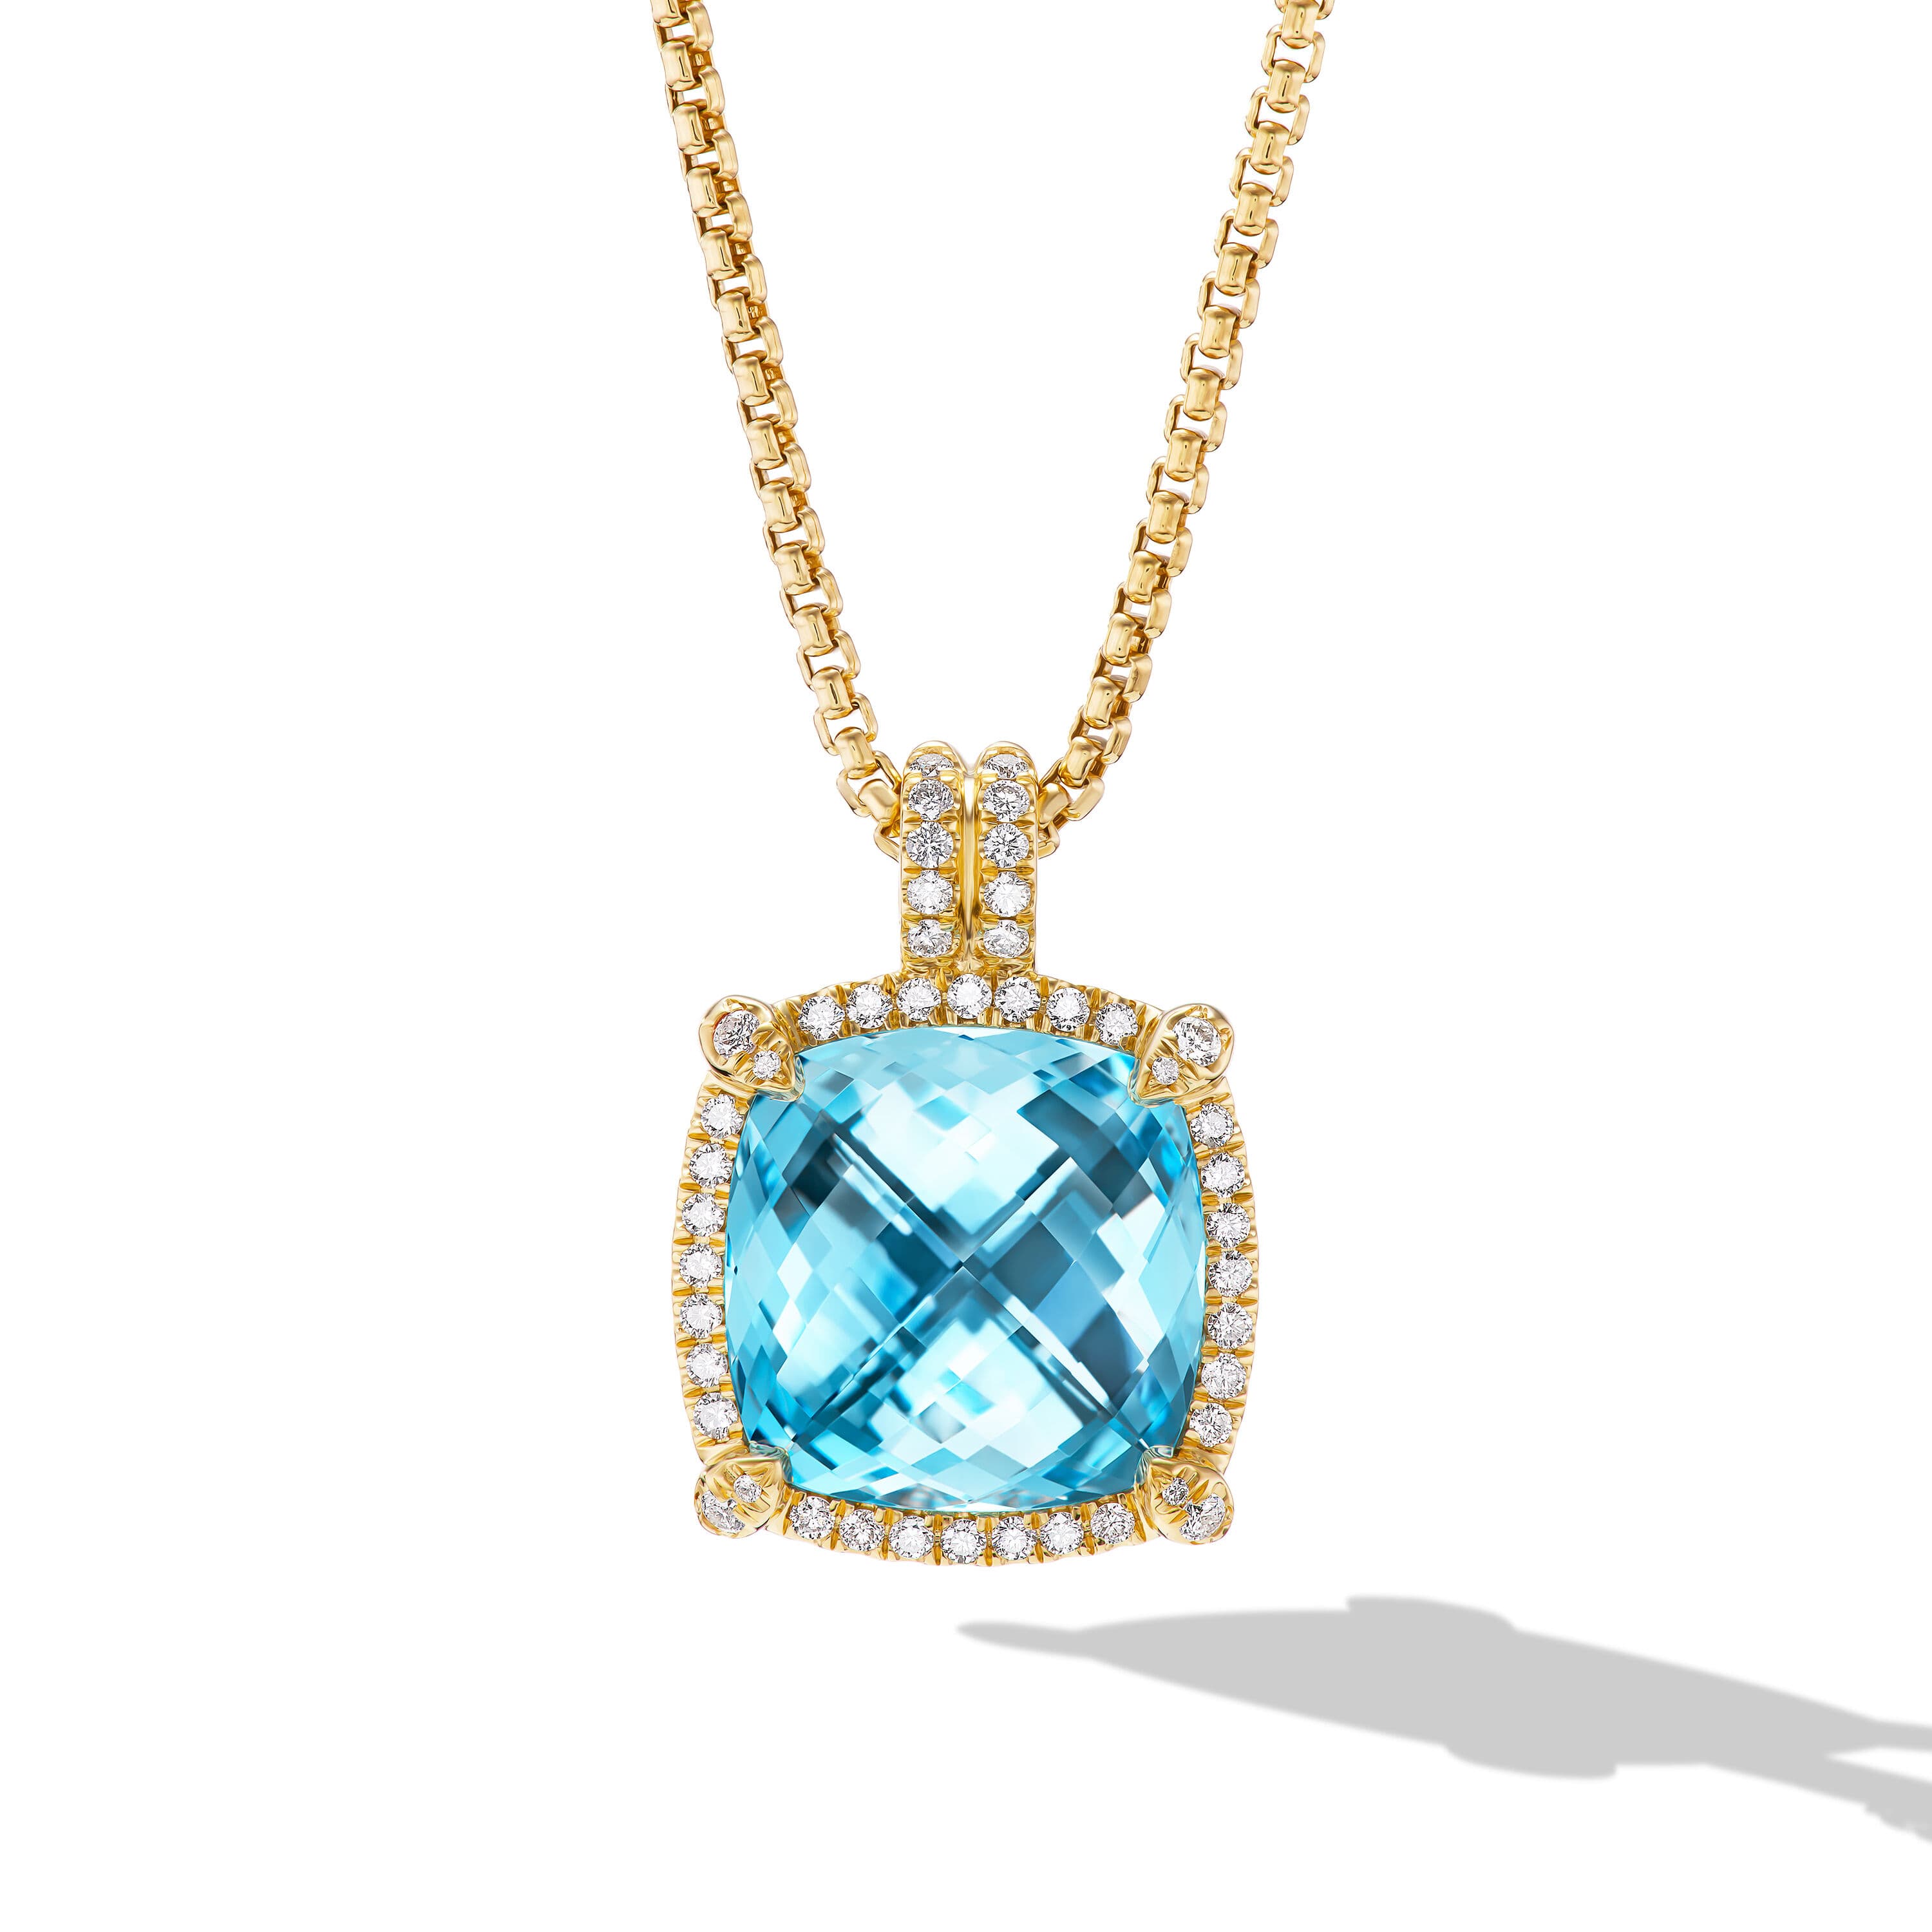 David Yurman Chatelaine Pave Bezel Pendant Necklace in 18K Yellow Gold with Blue Topaz and Diamonds